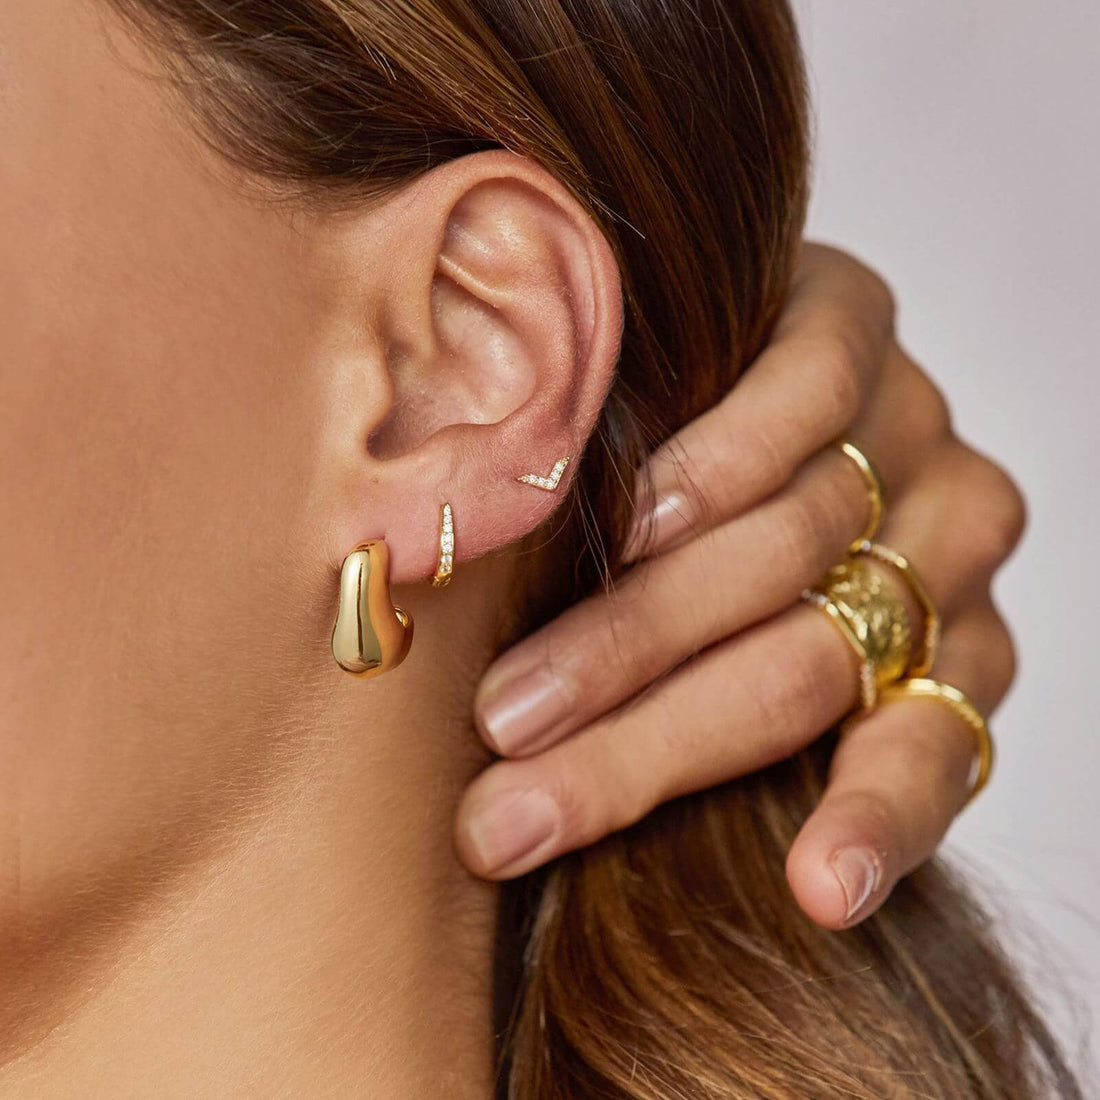 How to Stack & Style Your Earrings